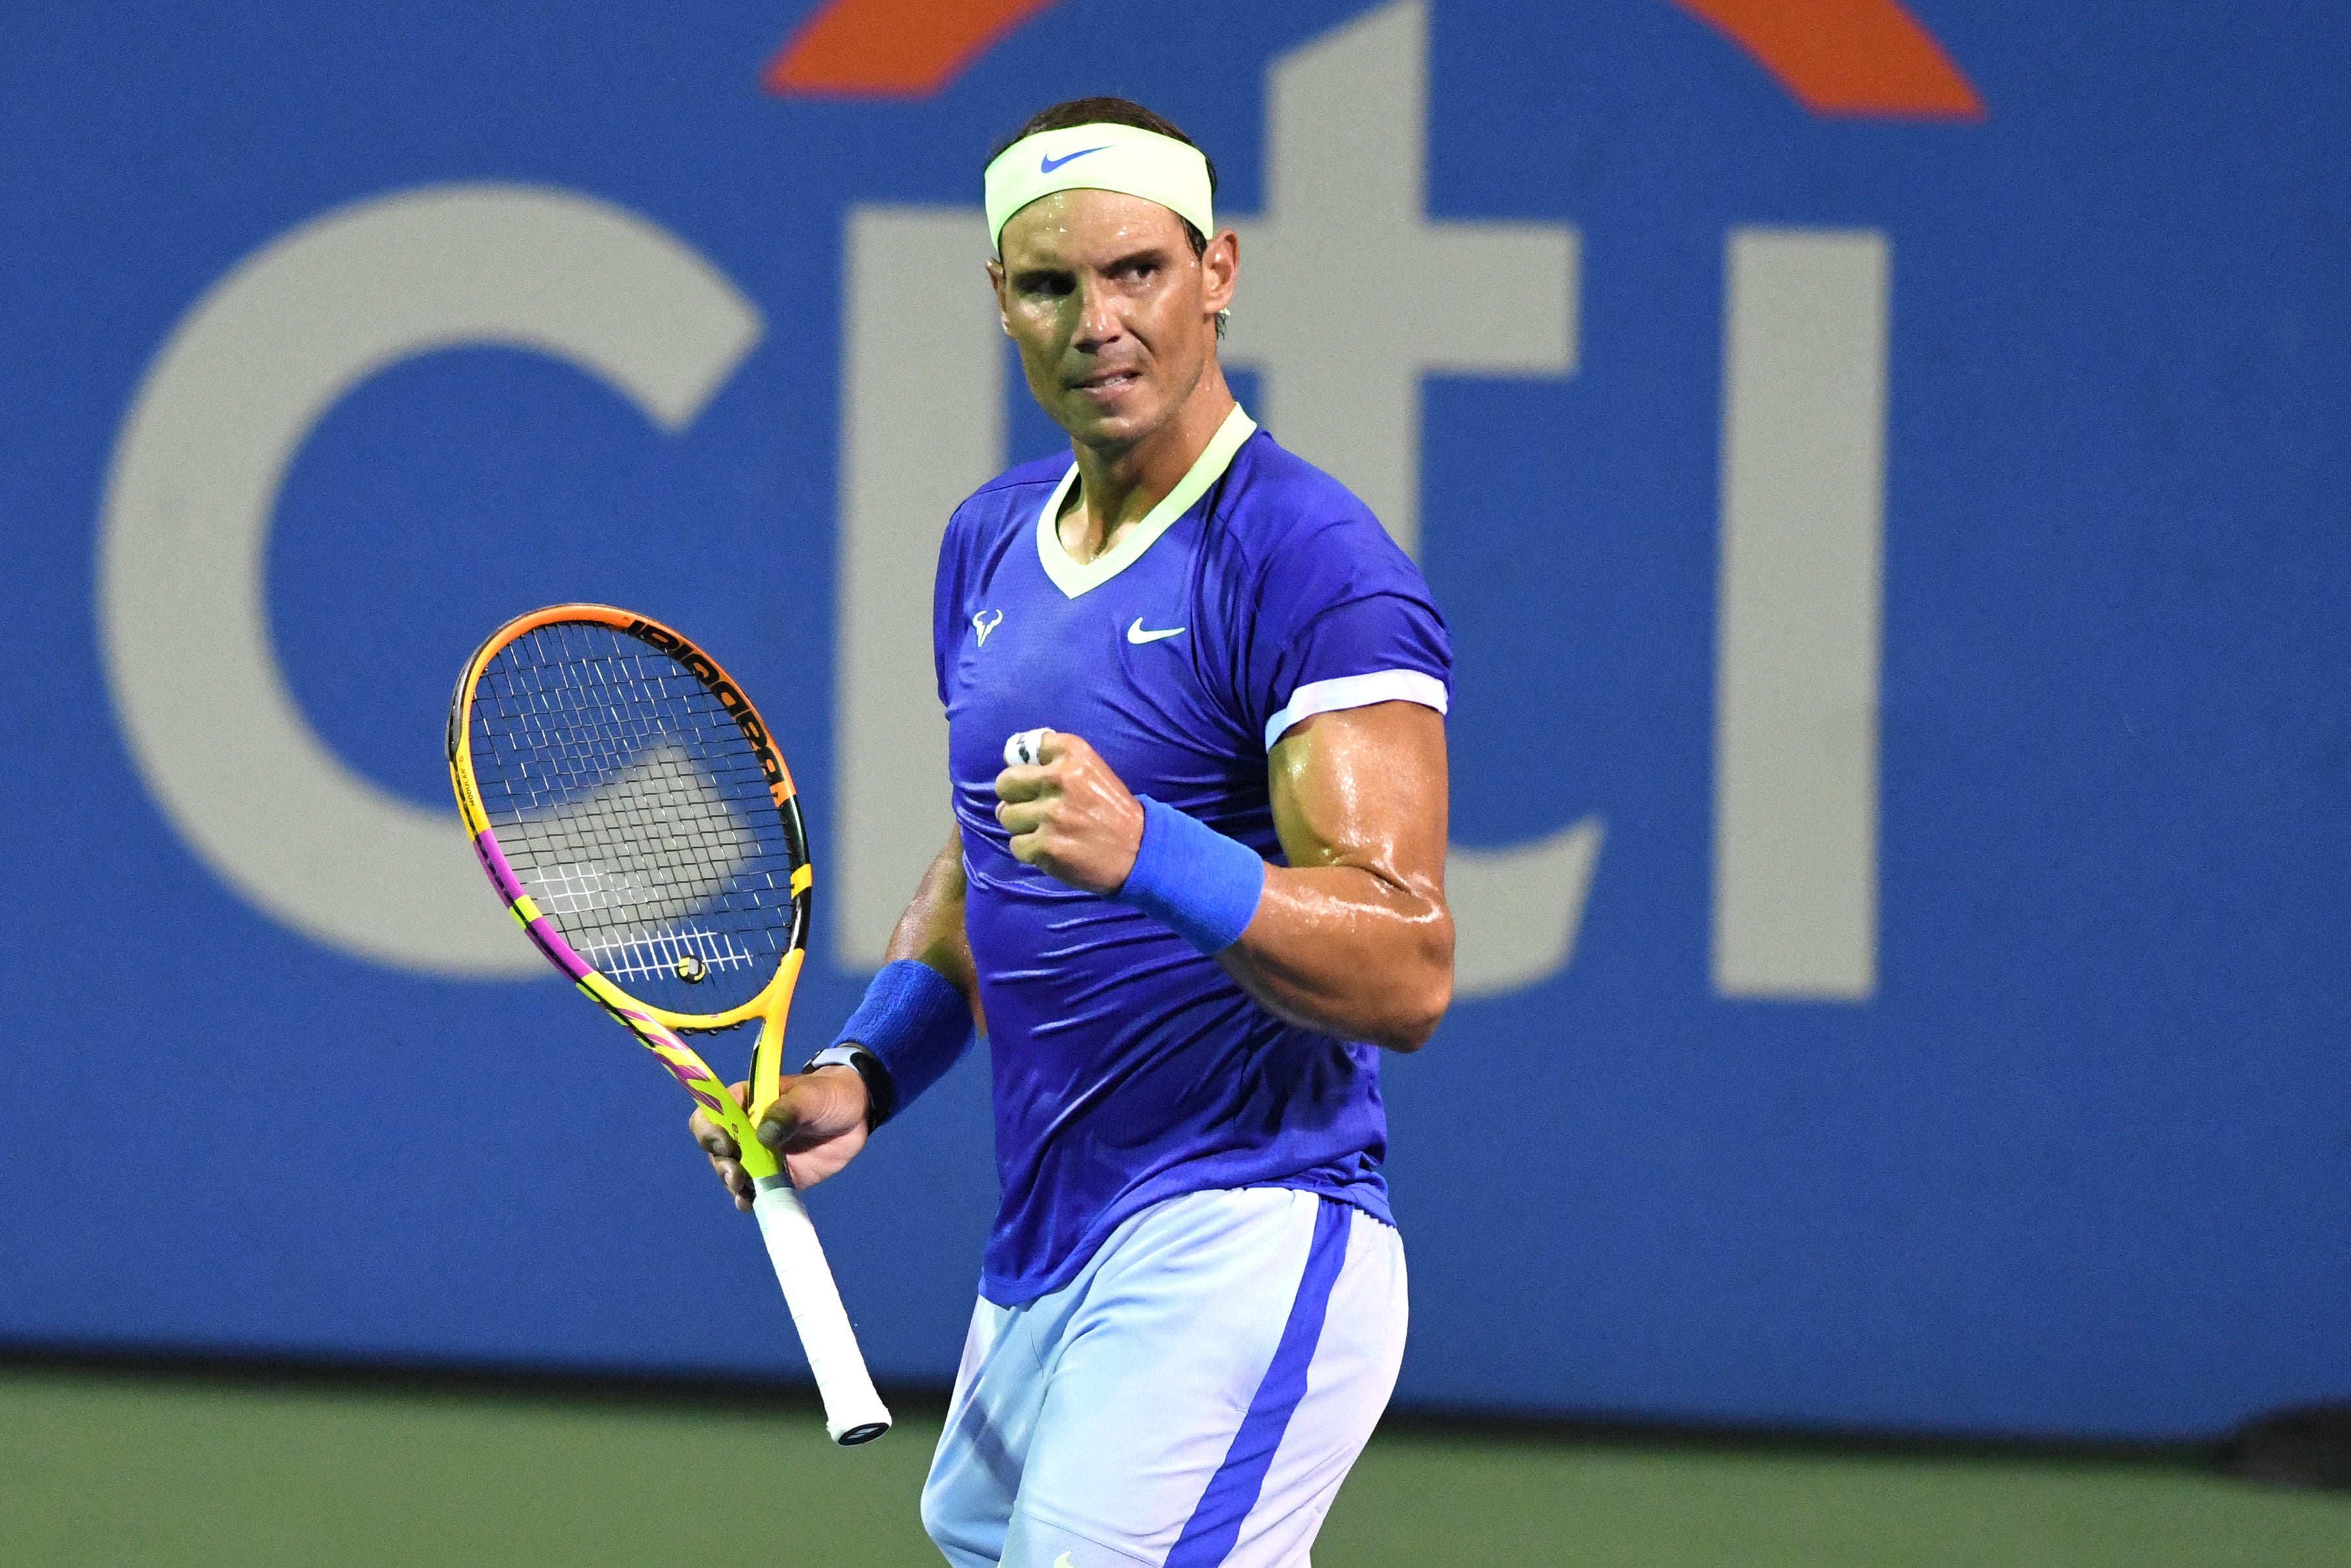 Rafa Nadal last competed at the Citi Open in August